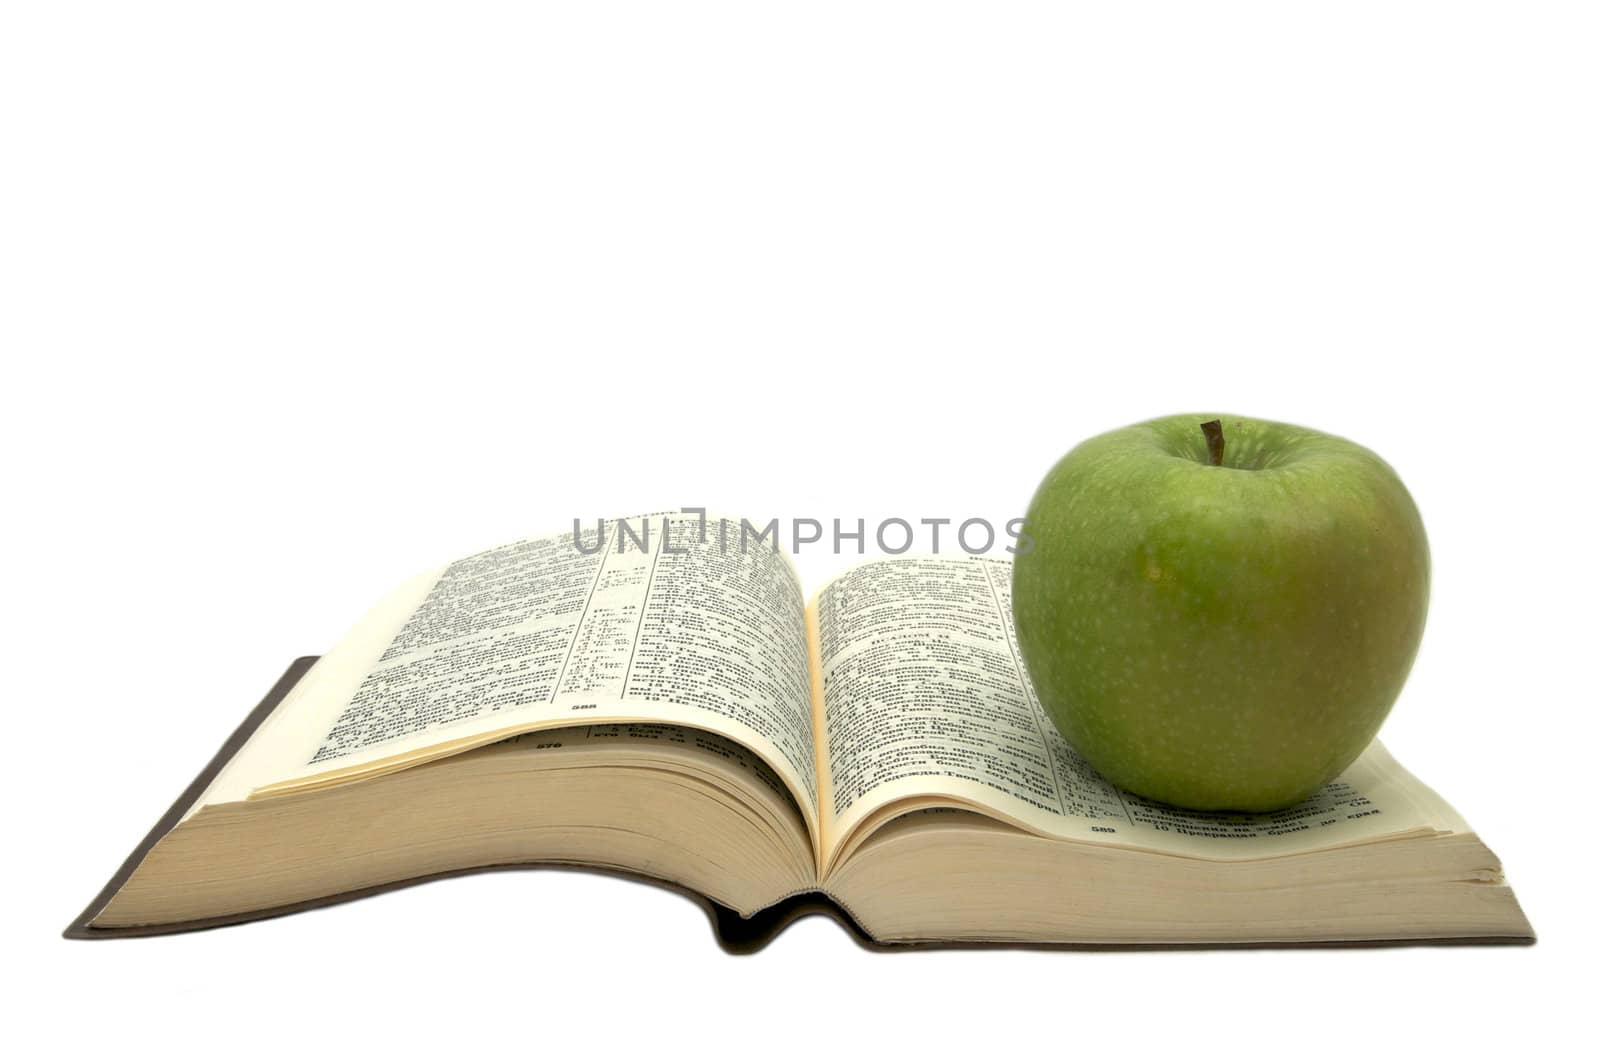 book of the Bible and an apple on a white background